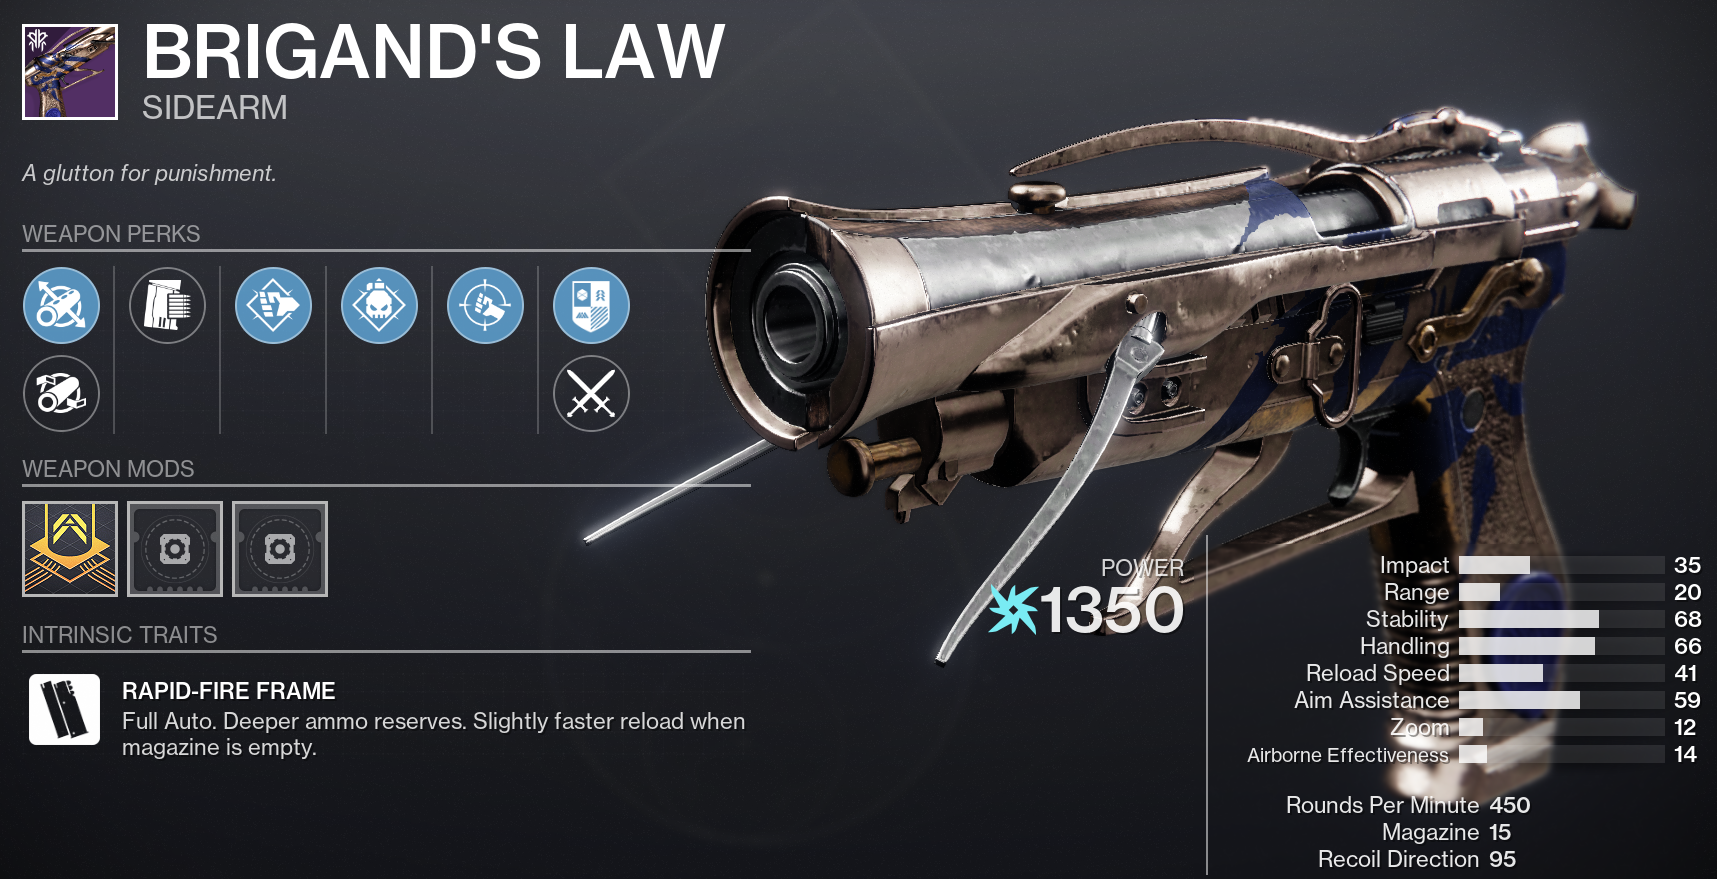 How to get Brigand’s Law in Destiny 2 - Brigand’s Law God Rolls for PvE and...